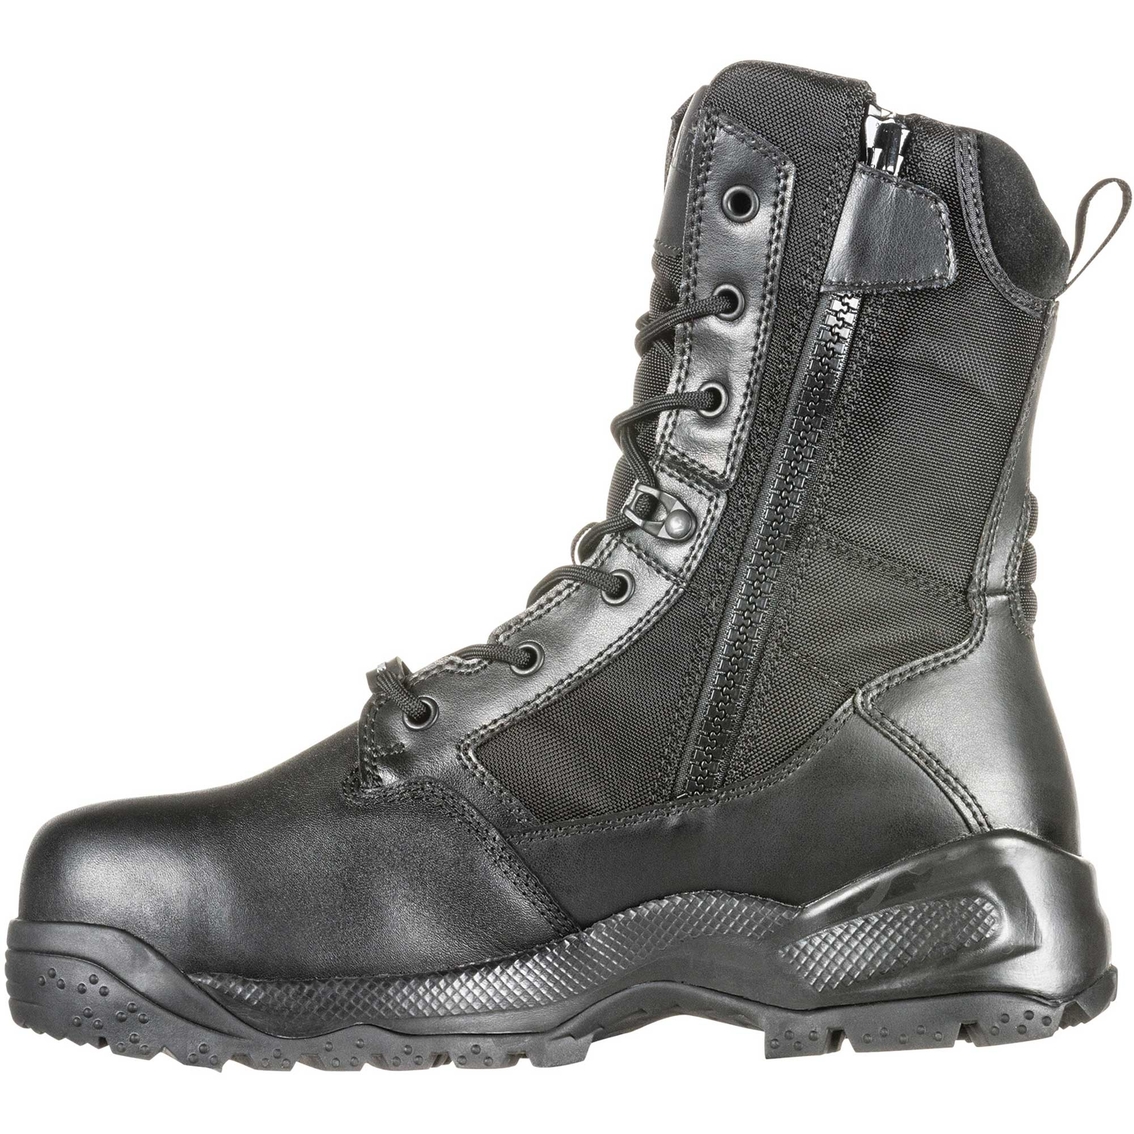 5.11 Men's A.T.A.C. 2.0 8 in. Shield Boots - Image 3 of 6